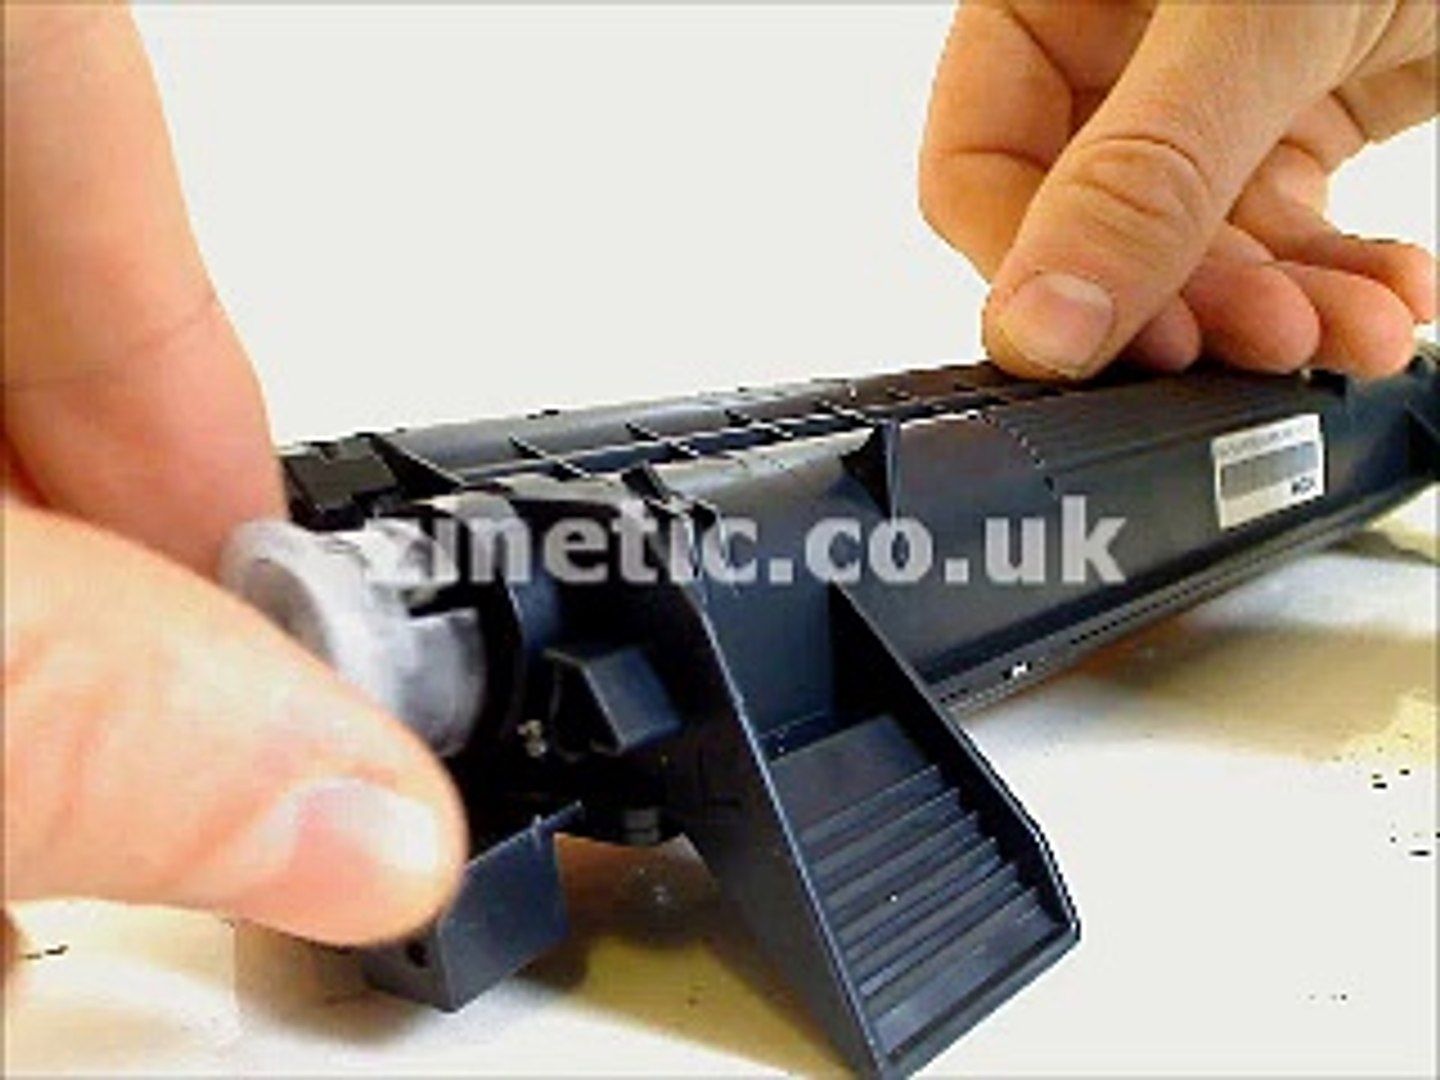 how to refill the Brother hl-1210w toner cartridge - video Dailymotion